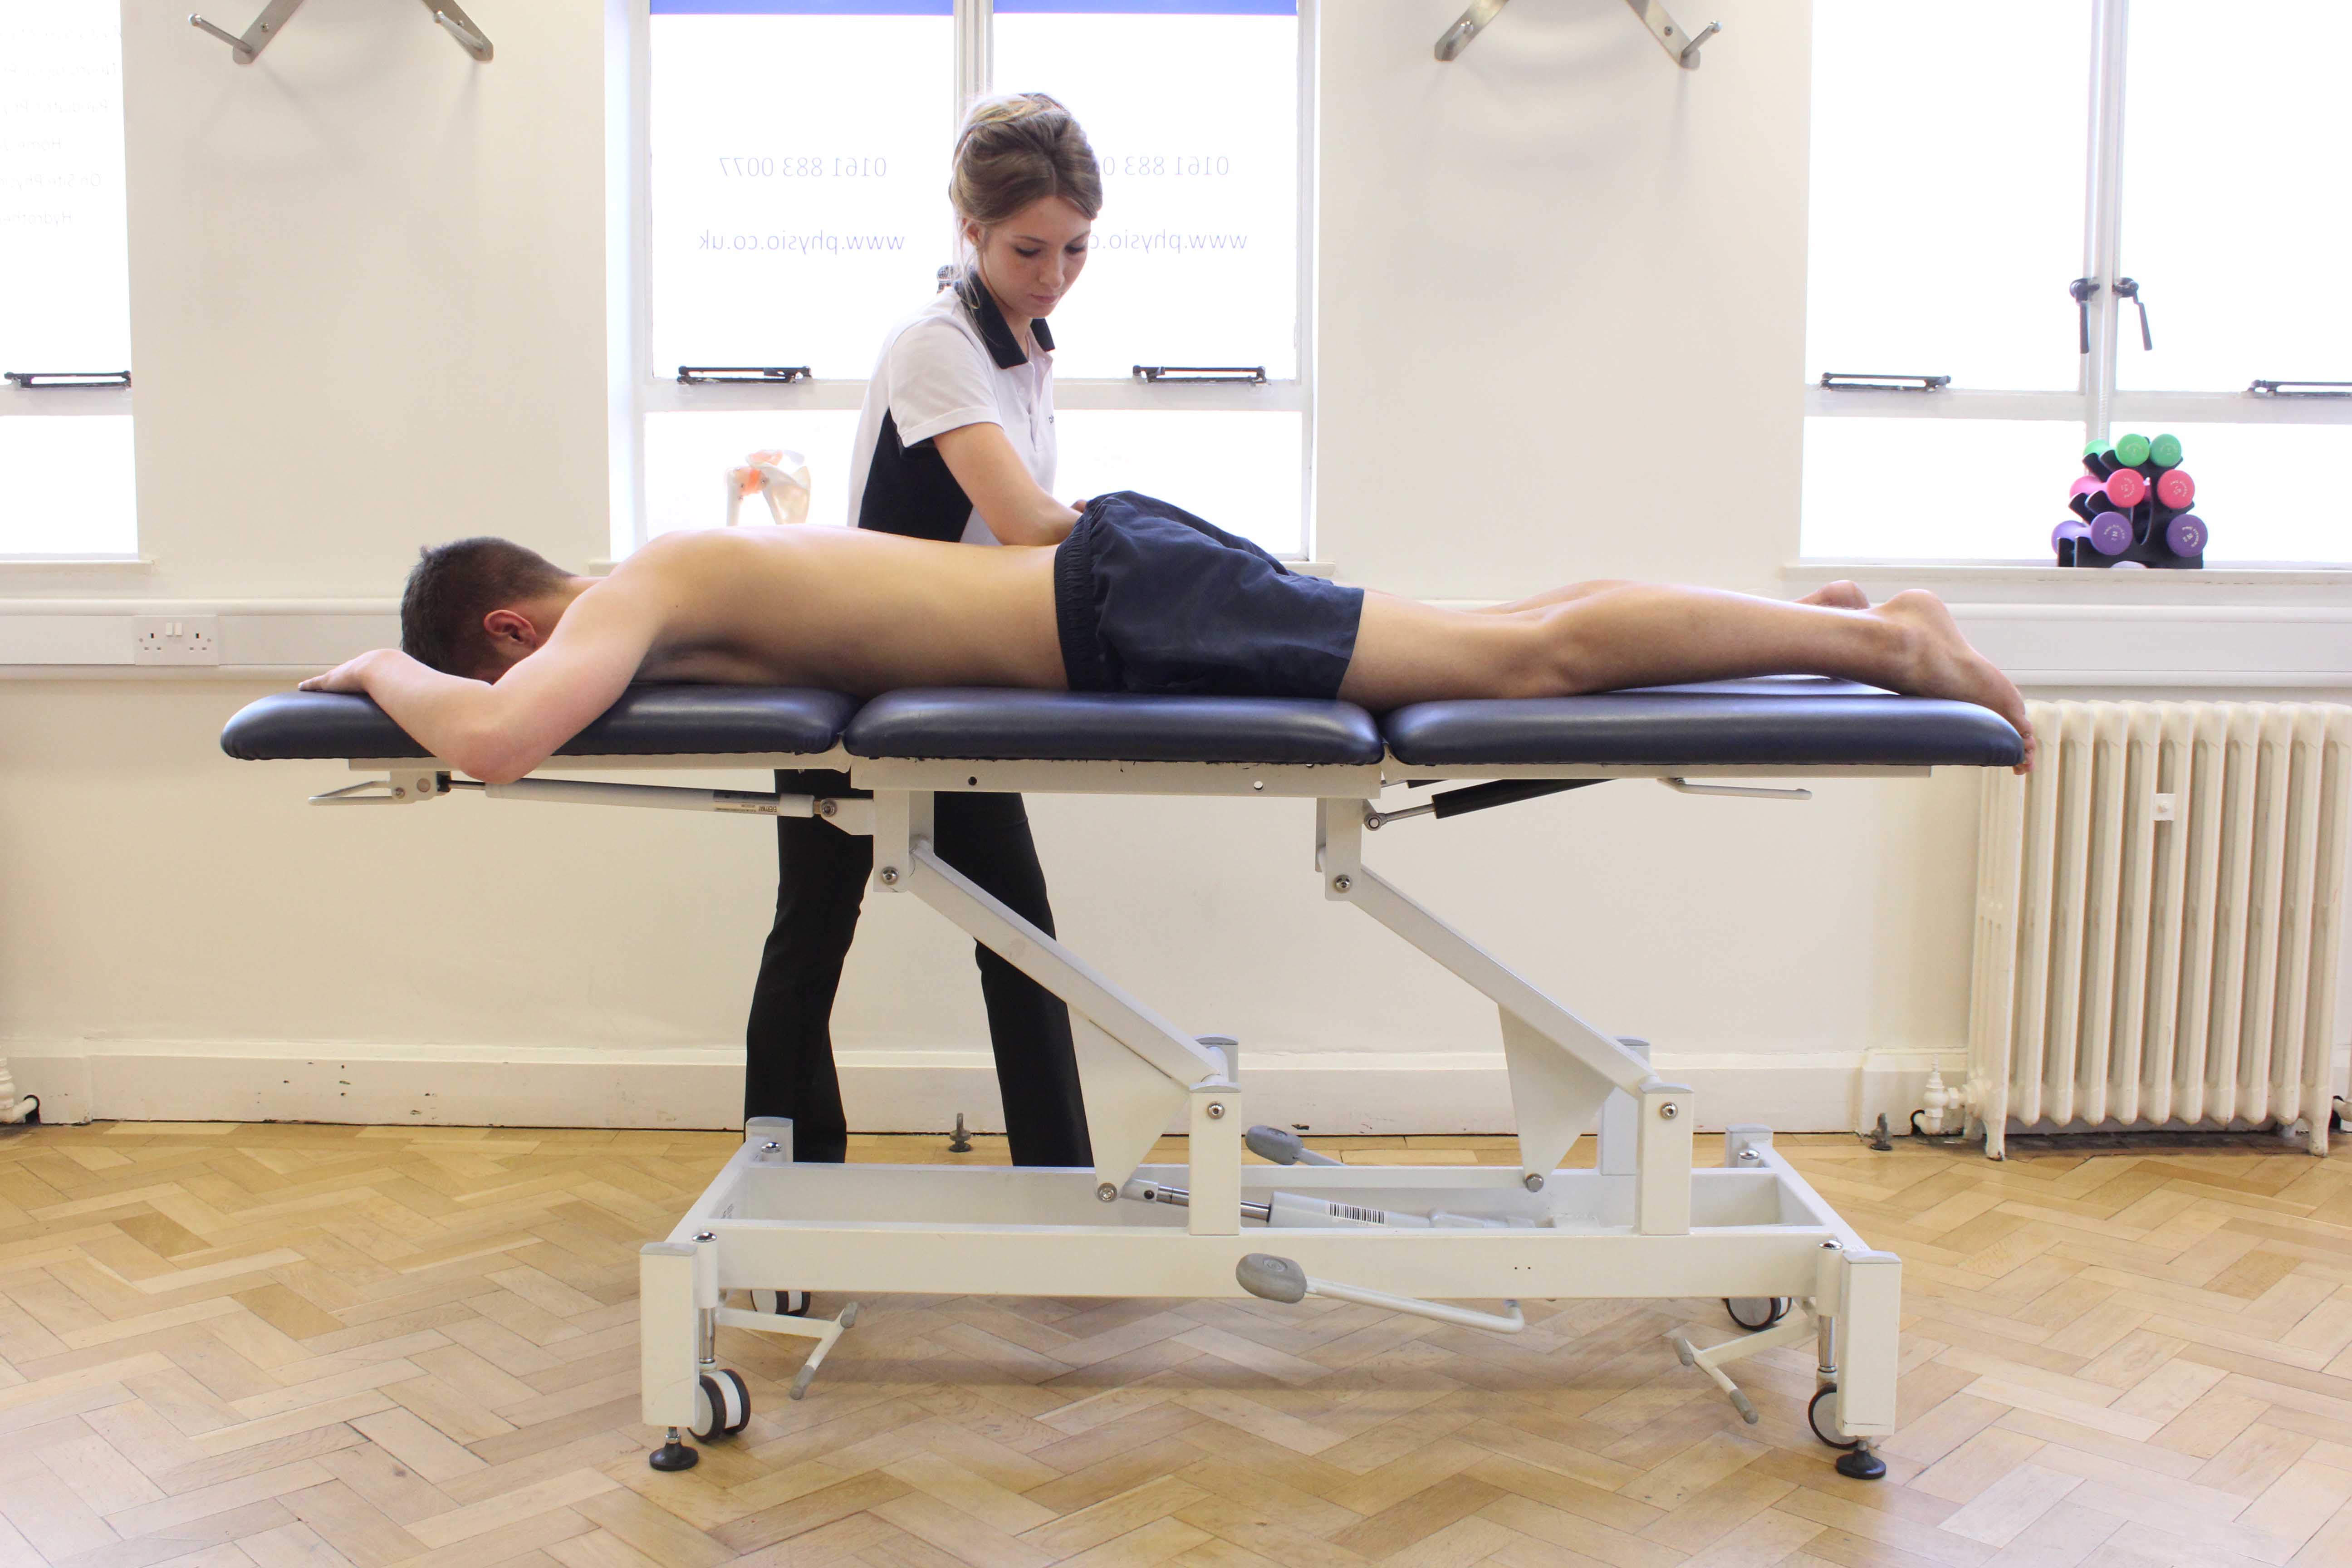 Pelvic floor and abdominal exercises supervised by a specialist physiotherapist